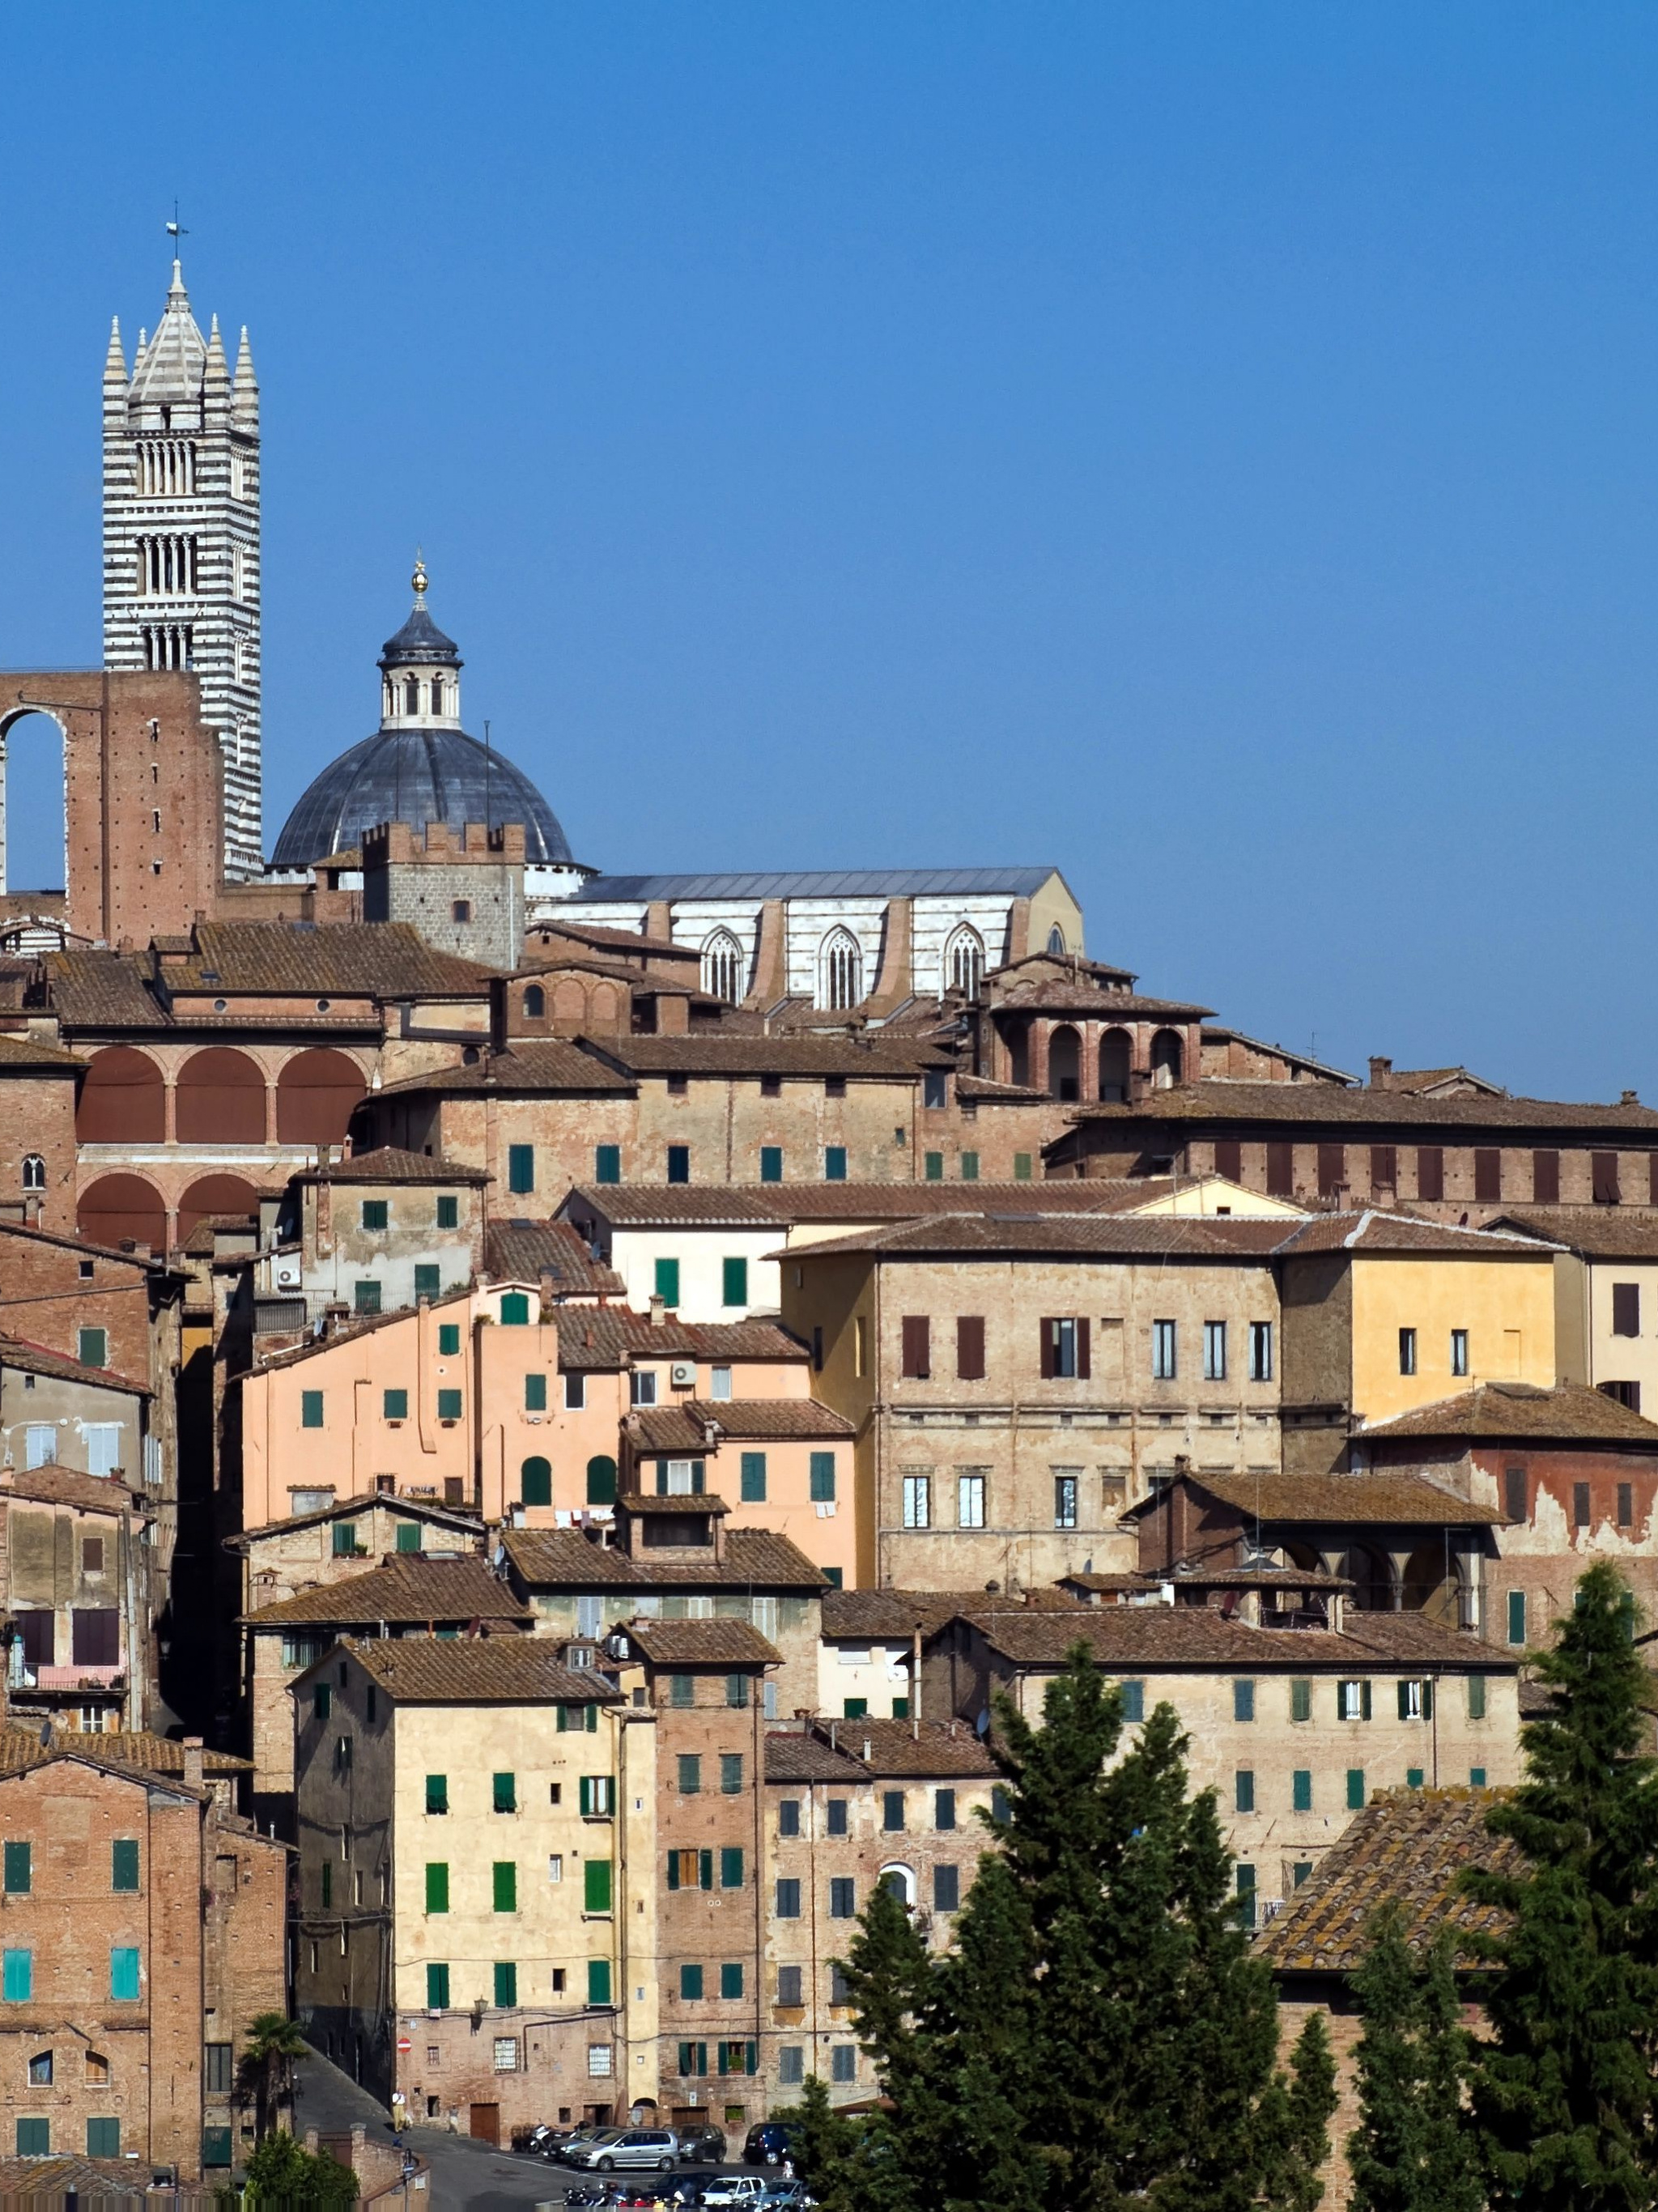 Free wallpapers Siena, Images and photos, Desktop backgrounds, Explore Siena, 2050x2740 HD Handy